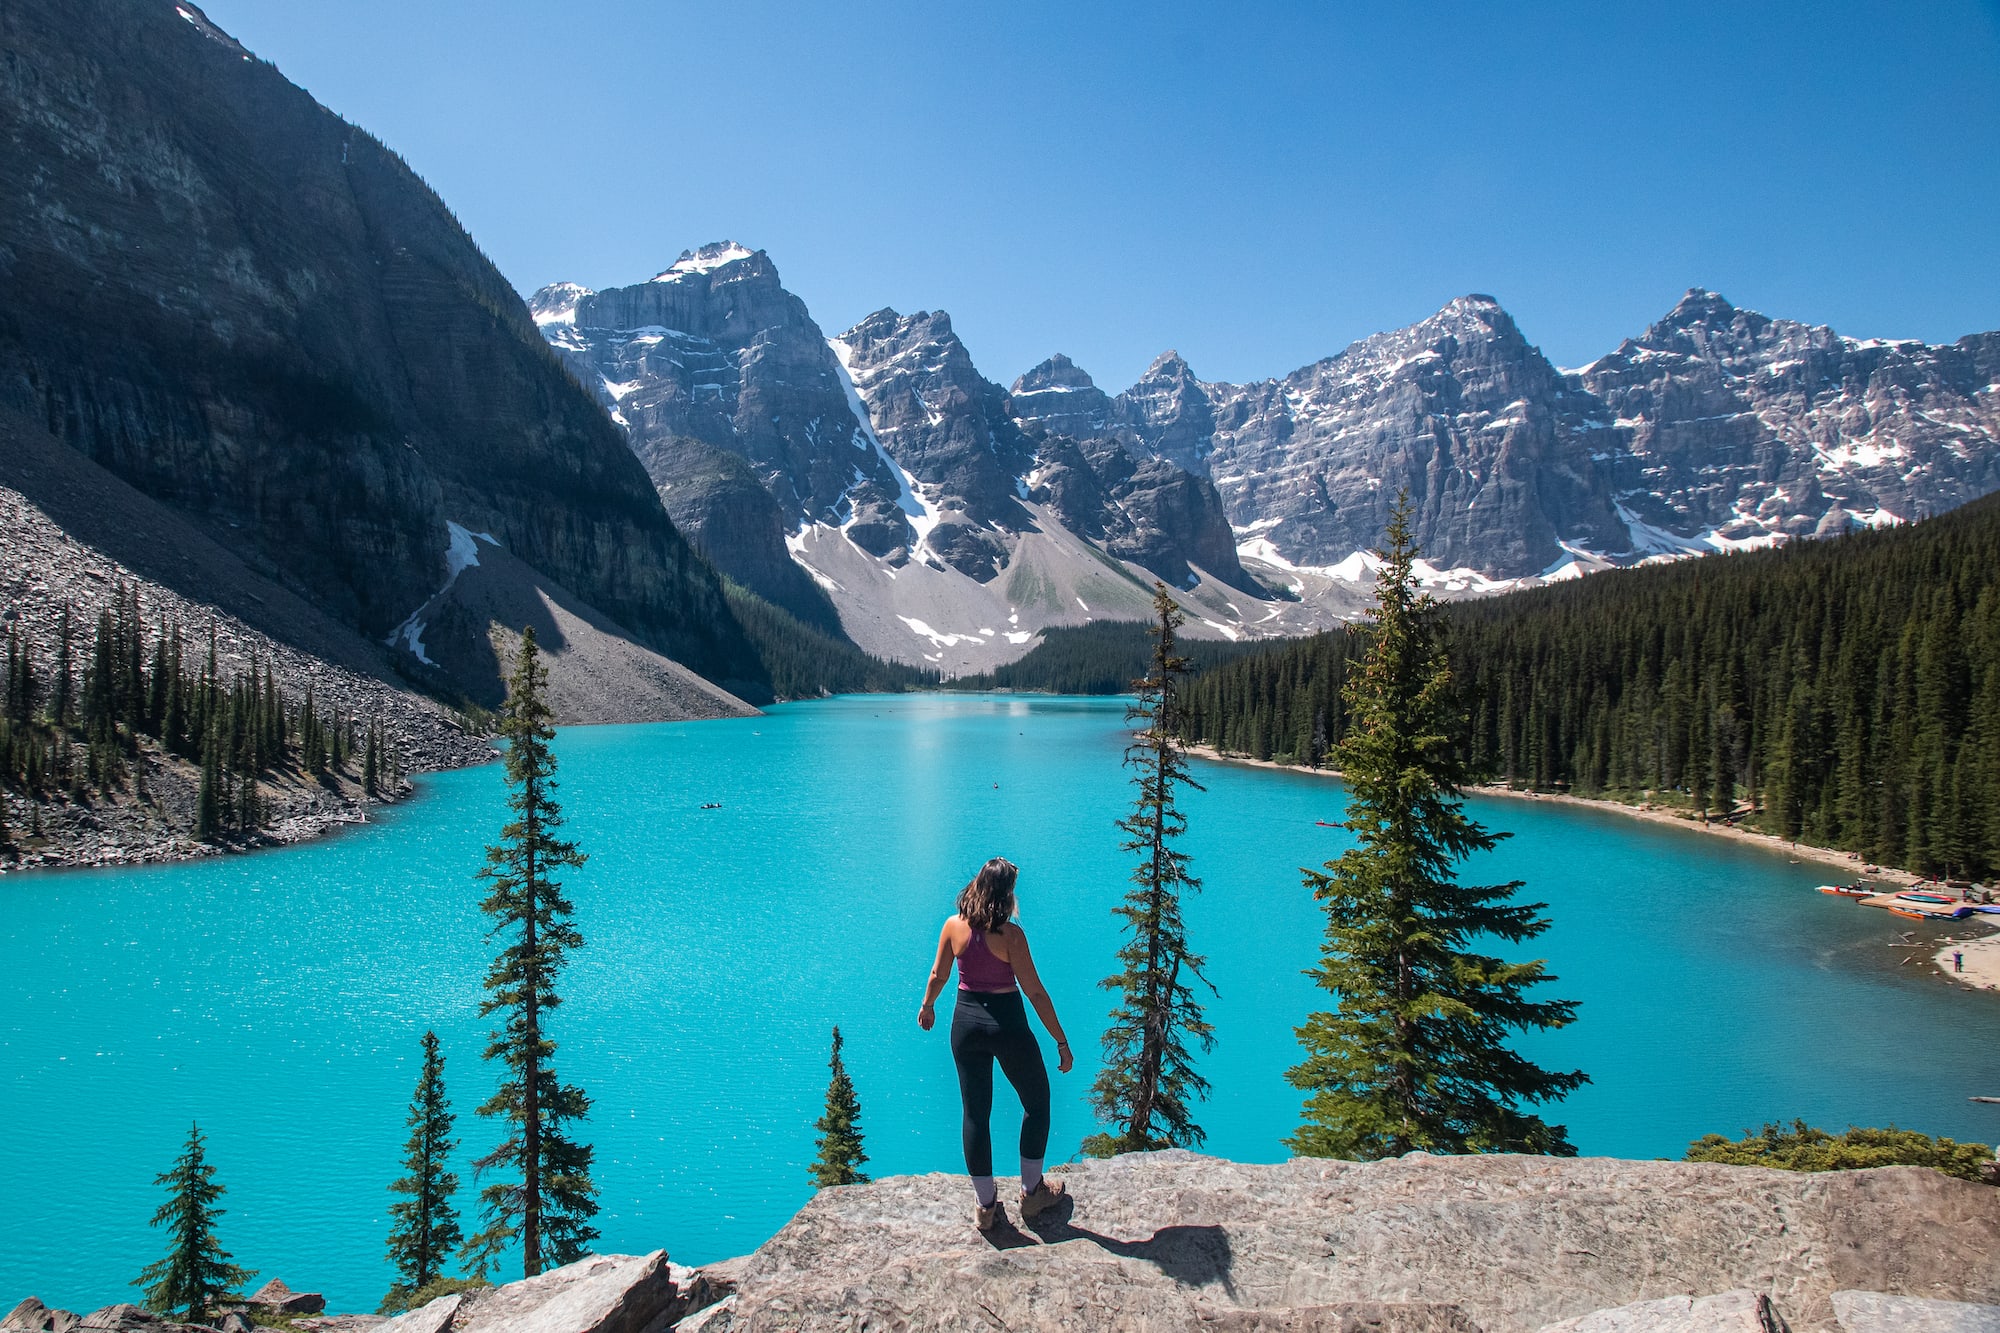 Girl standing at moraine lake with stunning blue color and mountain peaks behind her